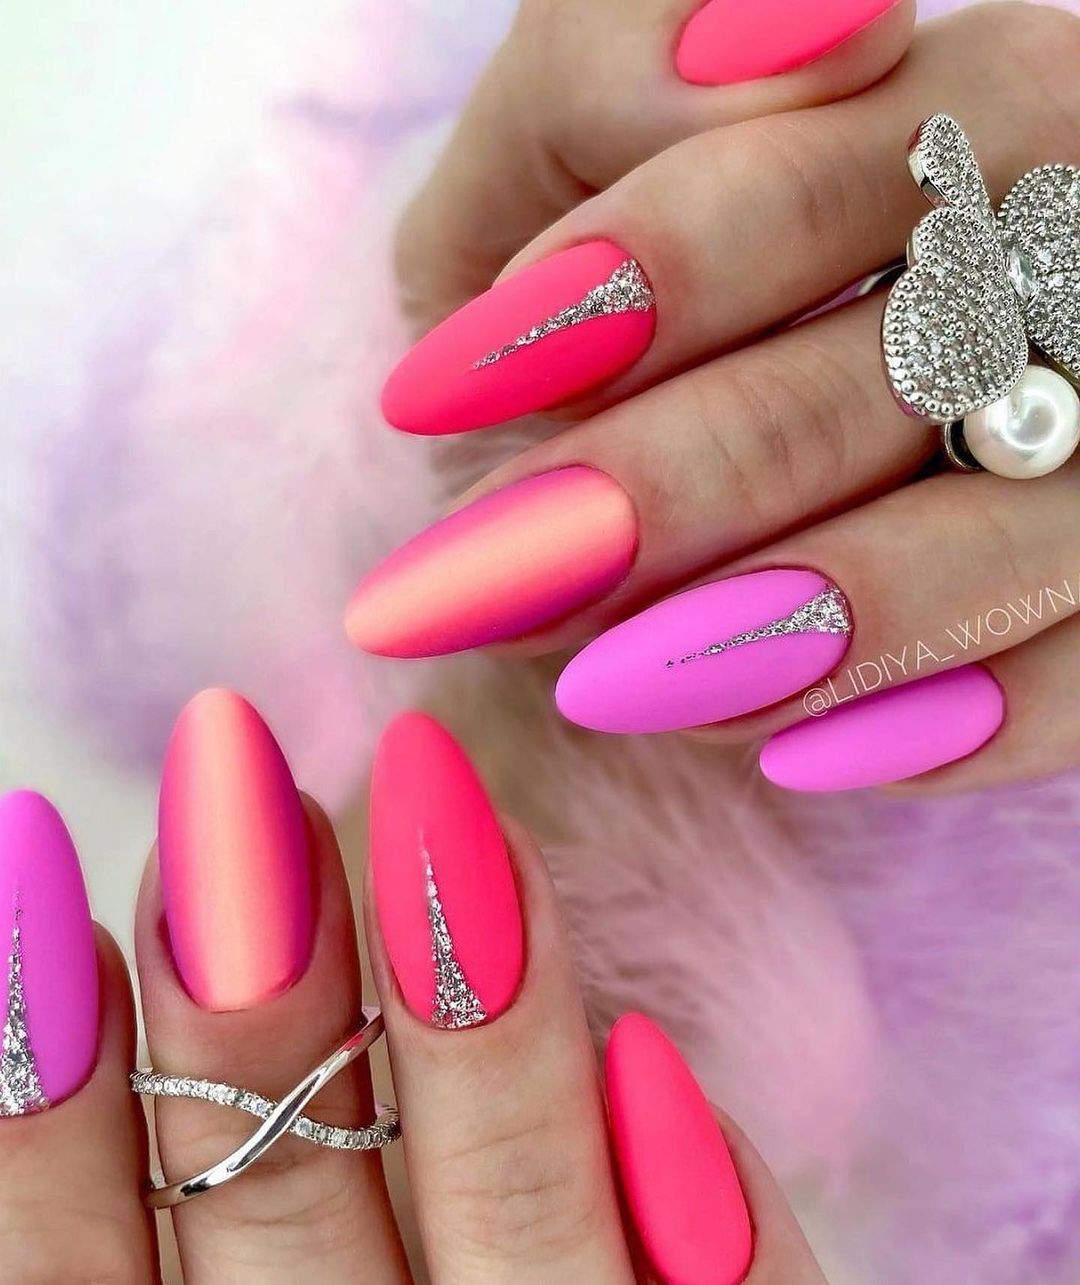 50 Best Nail Designs Trends To Try Out In 2022 images 42